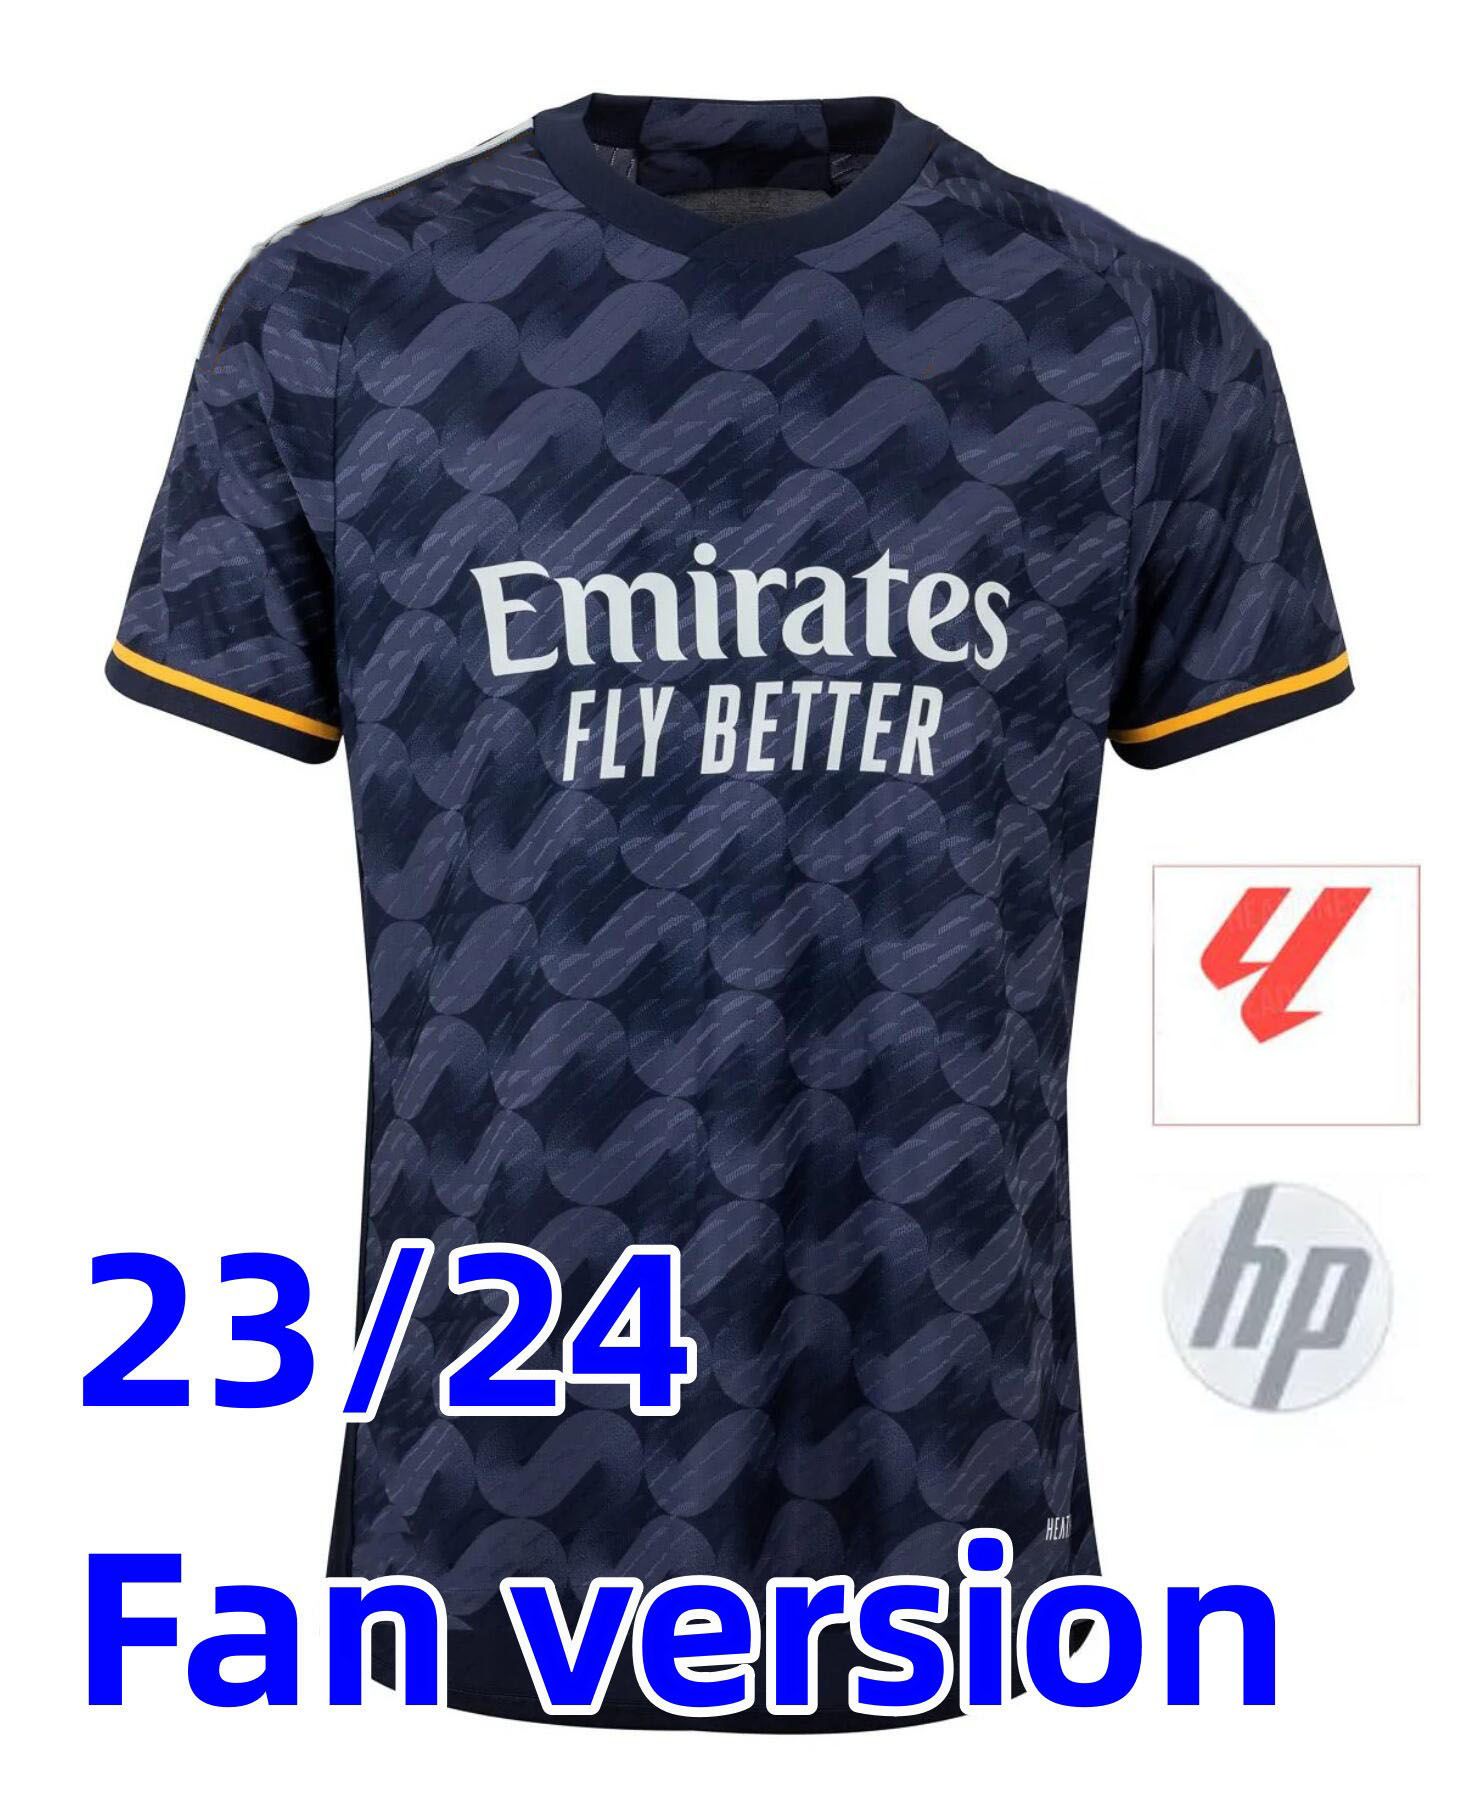 23/24 away patch